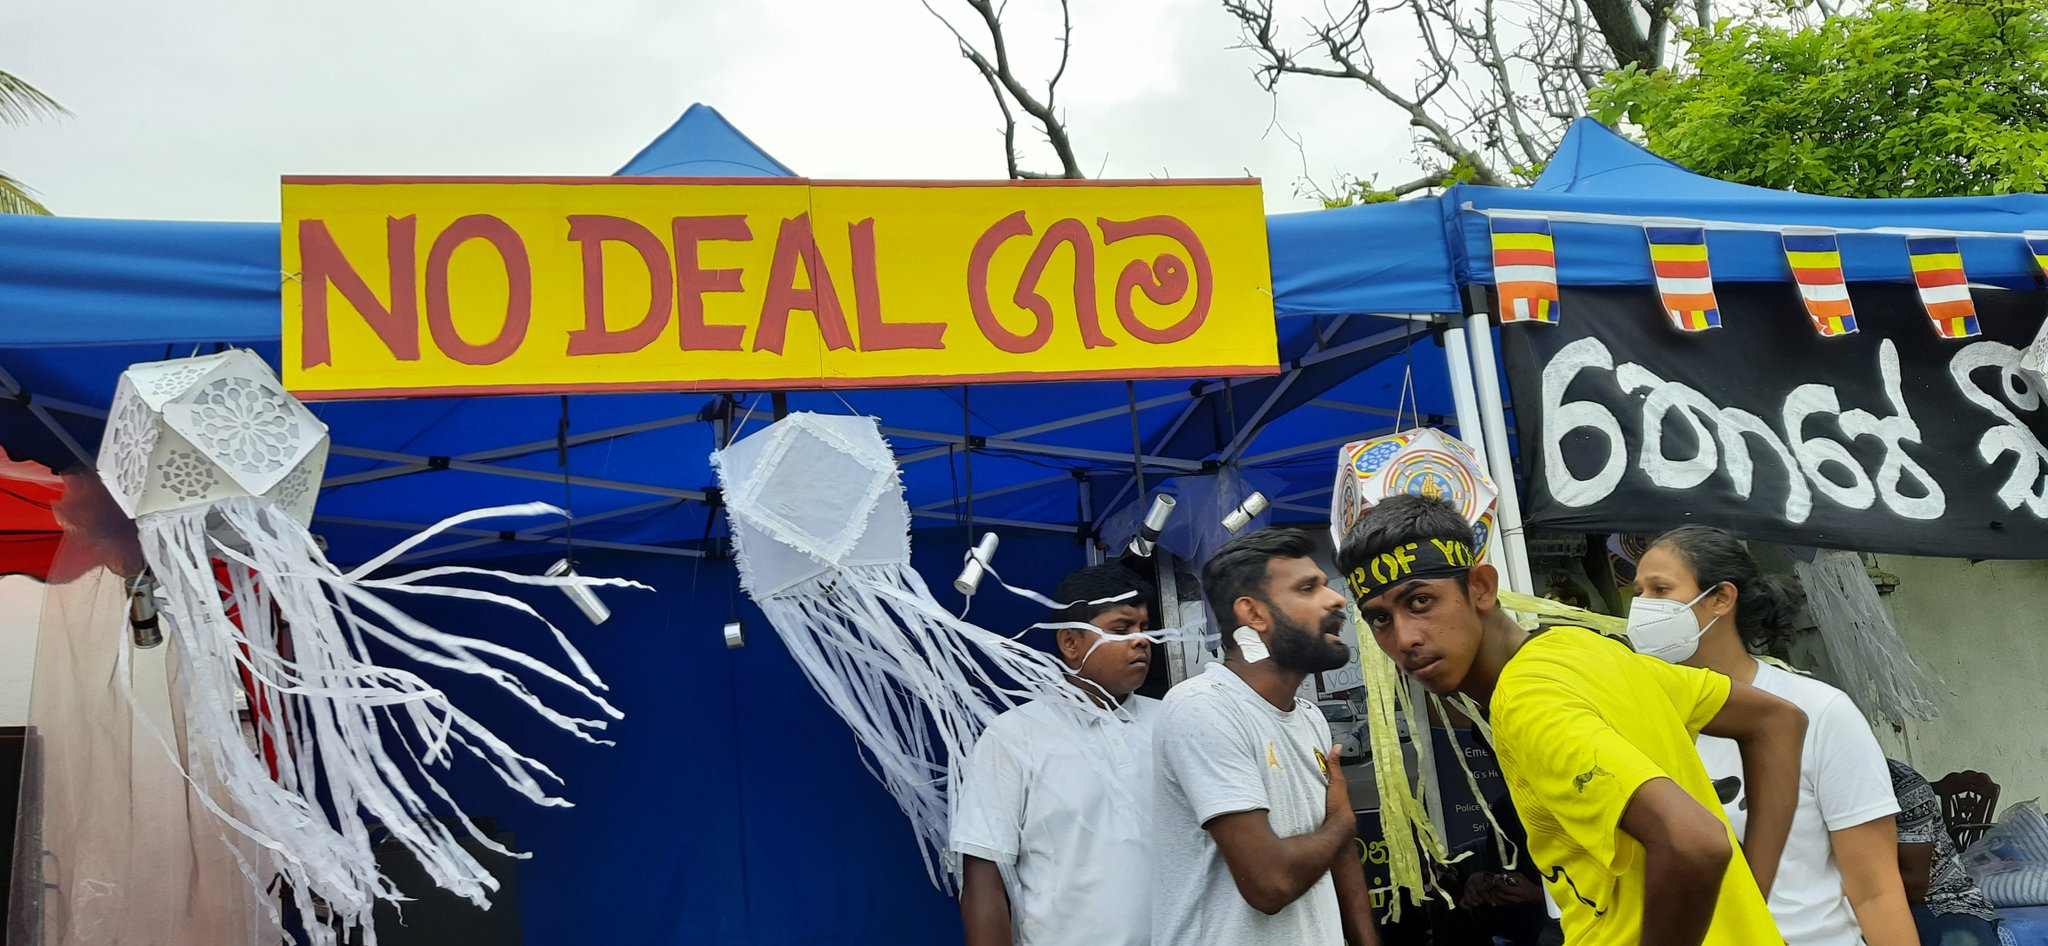 Protesters to remove No deal gama protest site